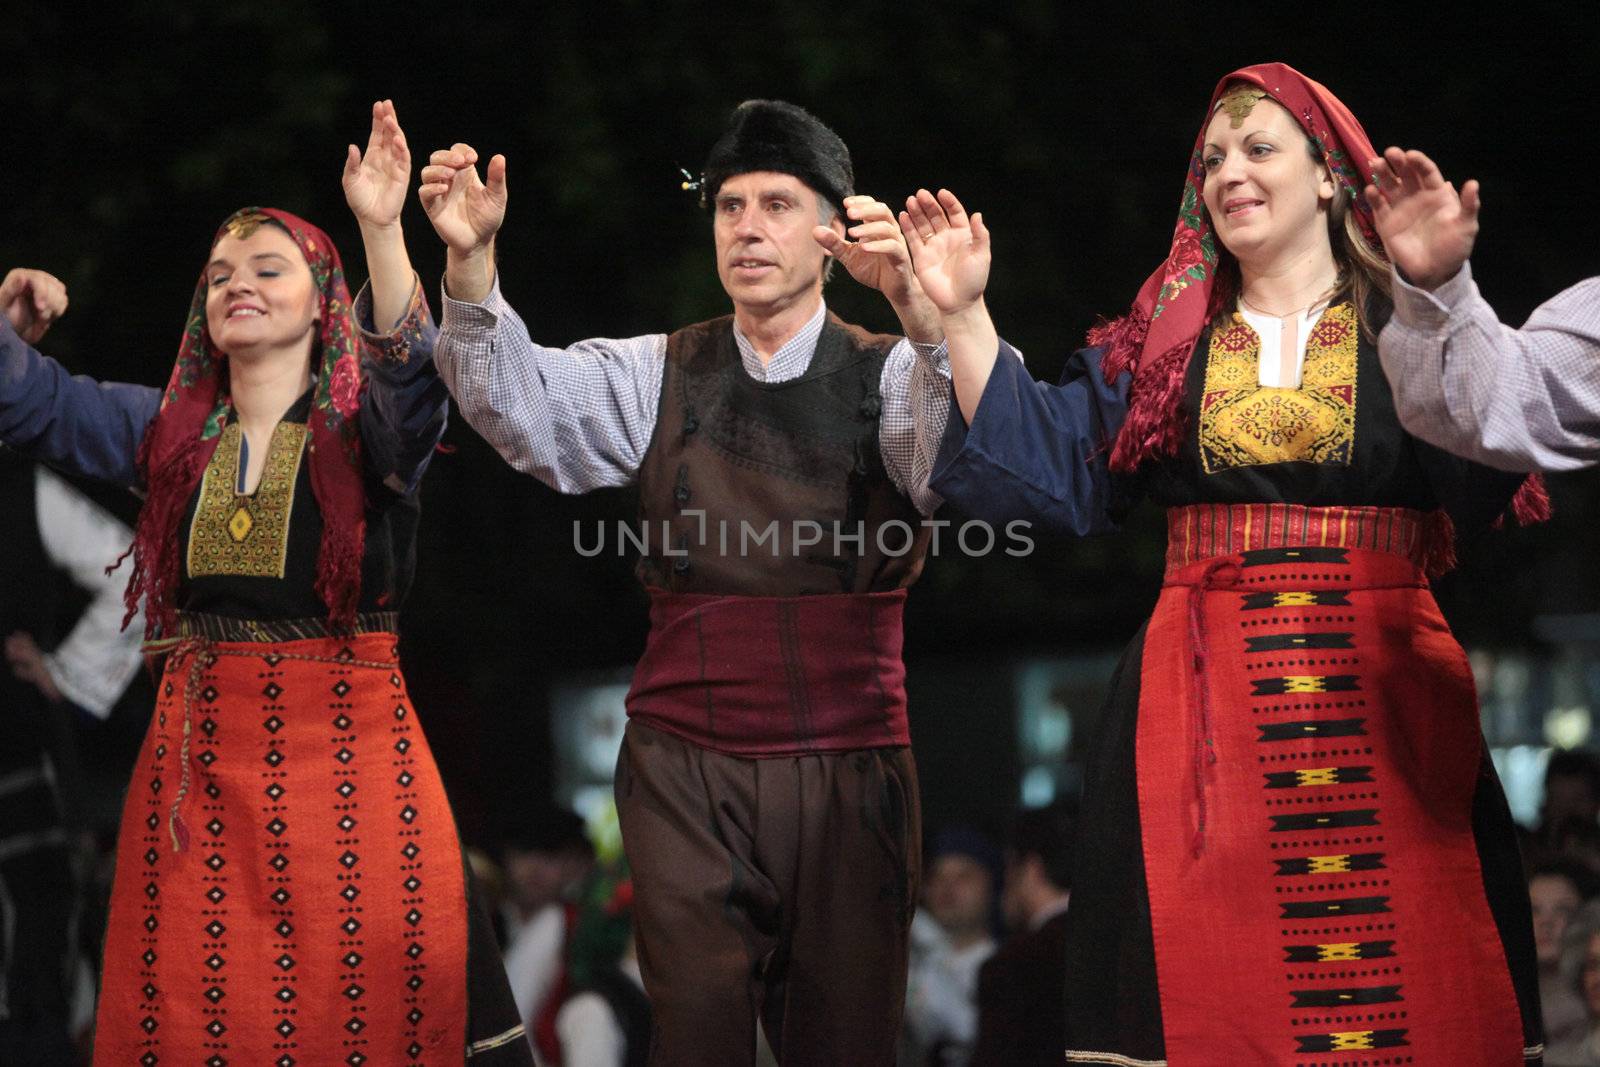 Traditional dances of Thrace - Greece by Portokalis